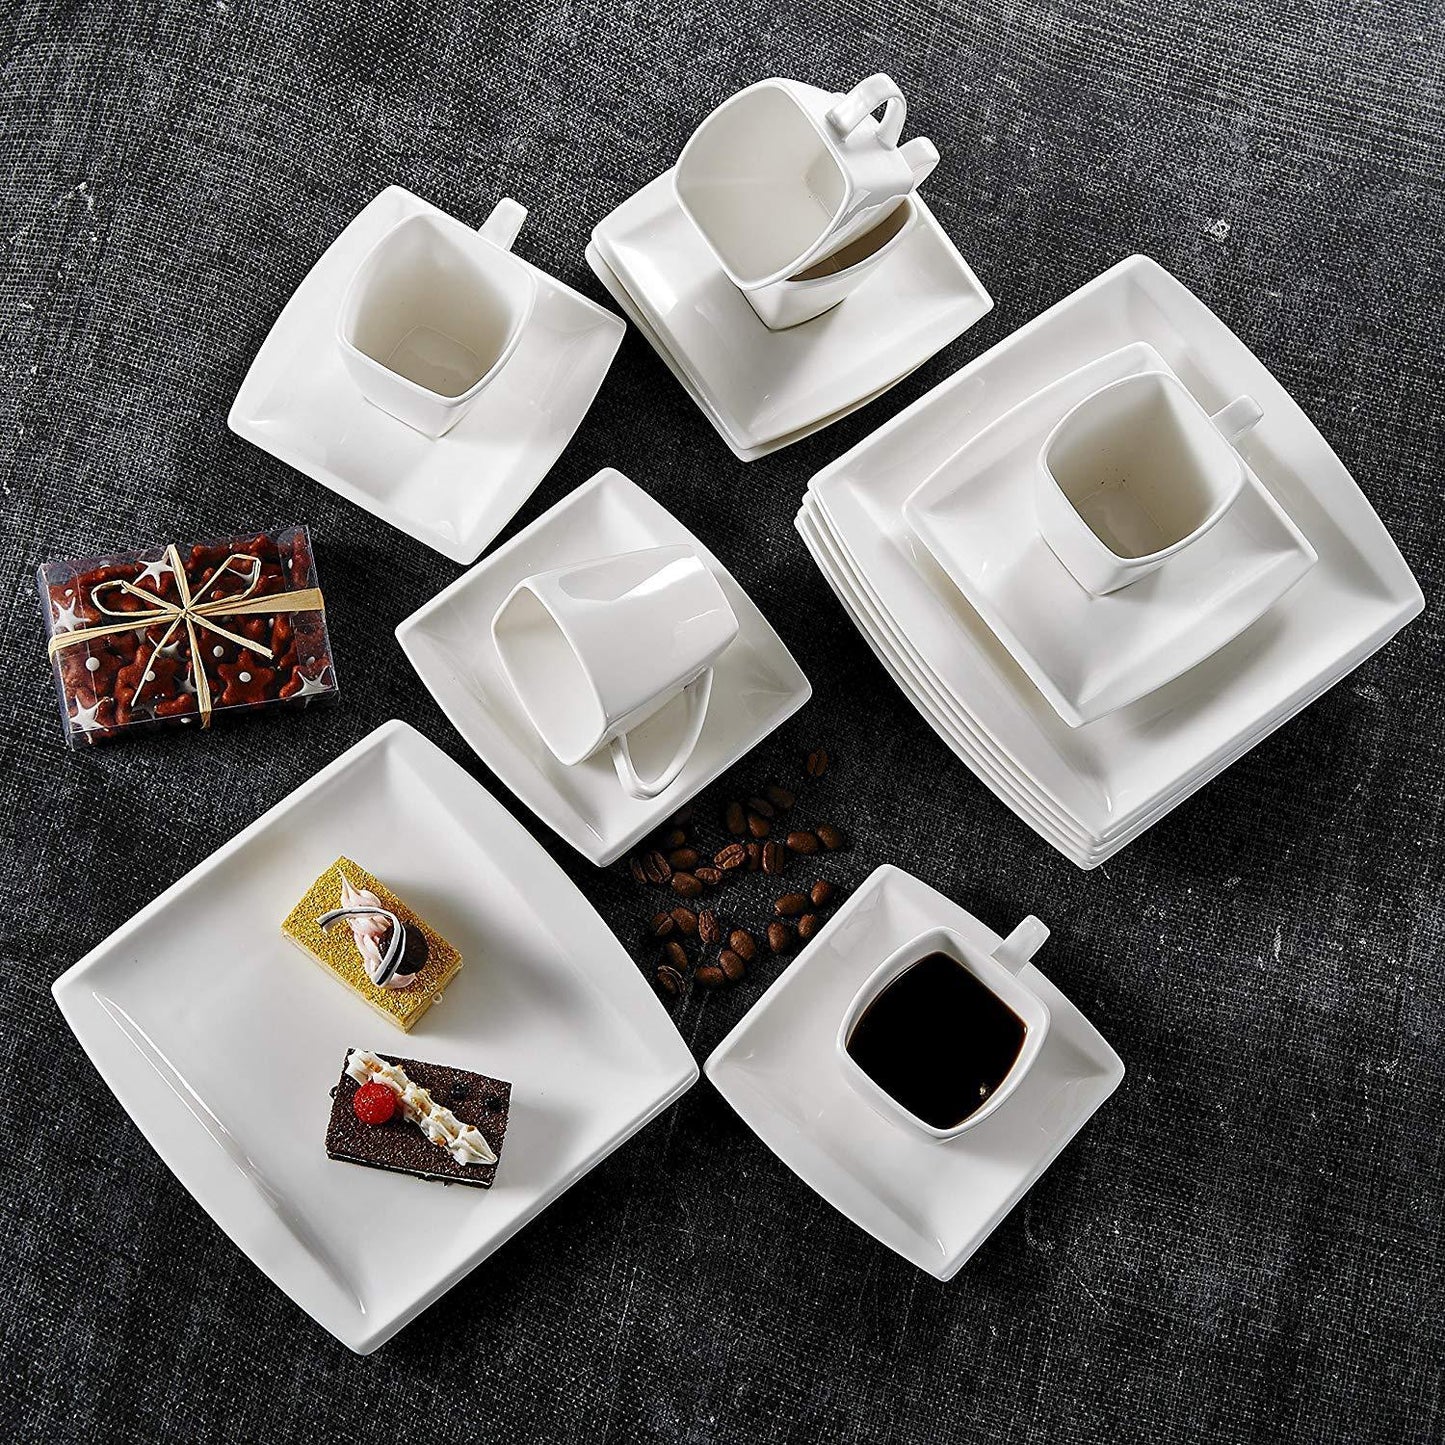 Blance 18-Piece White Porcelain Ceramic Coffee Drinkware Sets with Coffee Cups,Saucers and Dessert Plates Service for 6 - Nordic Side - 18, and, Blance, Ceramic, Coffee, CupsSaucers, Dessert,